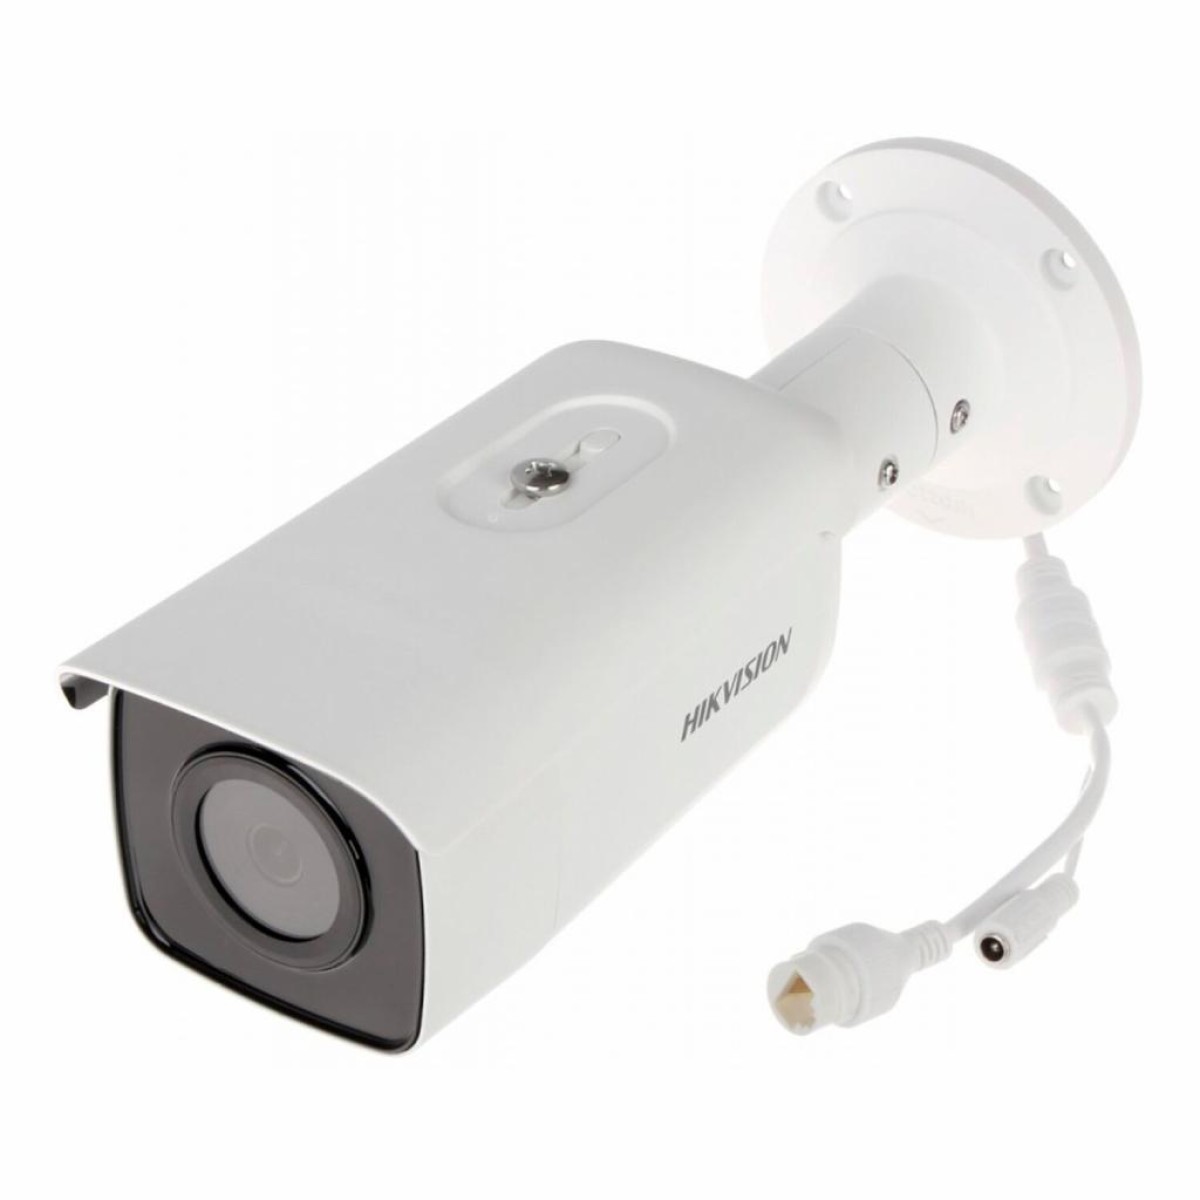 IP-камера Hikvision DS-2CD2T85G1-I8 (4.0) 98_98.jpg - фото 2